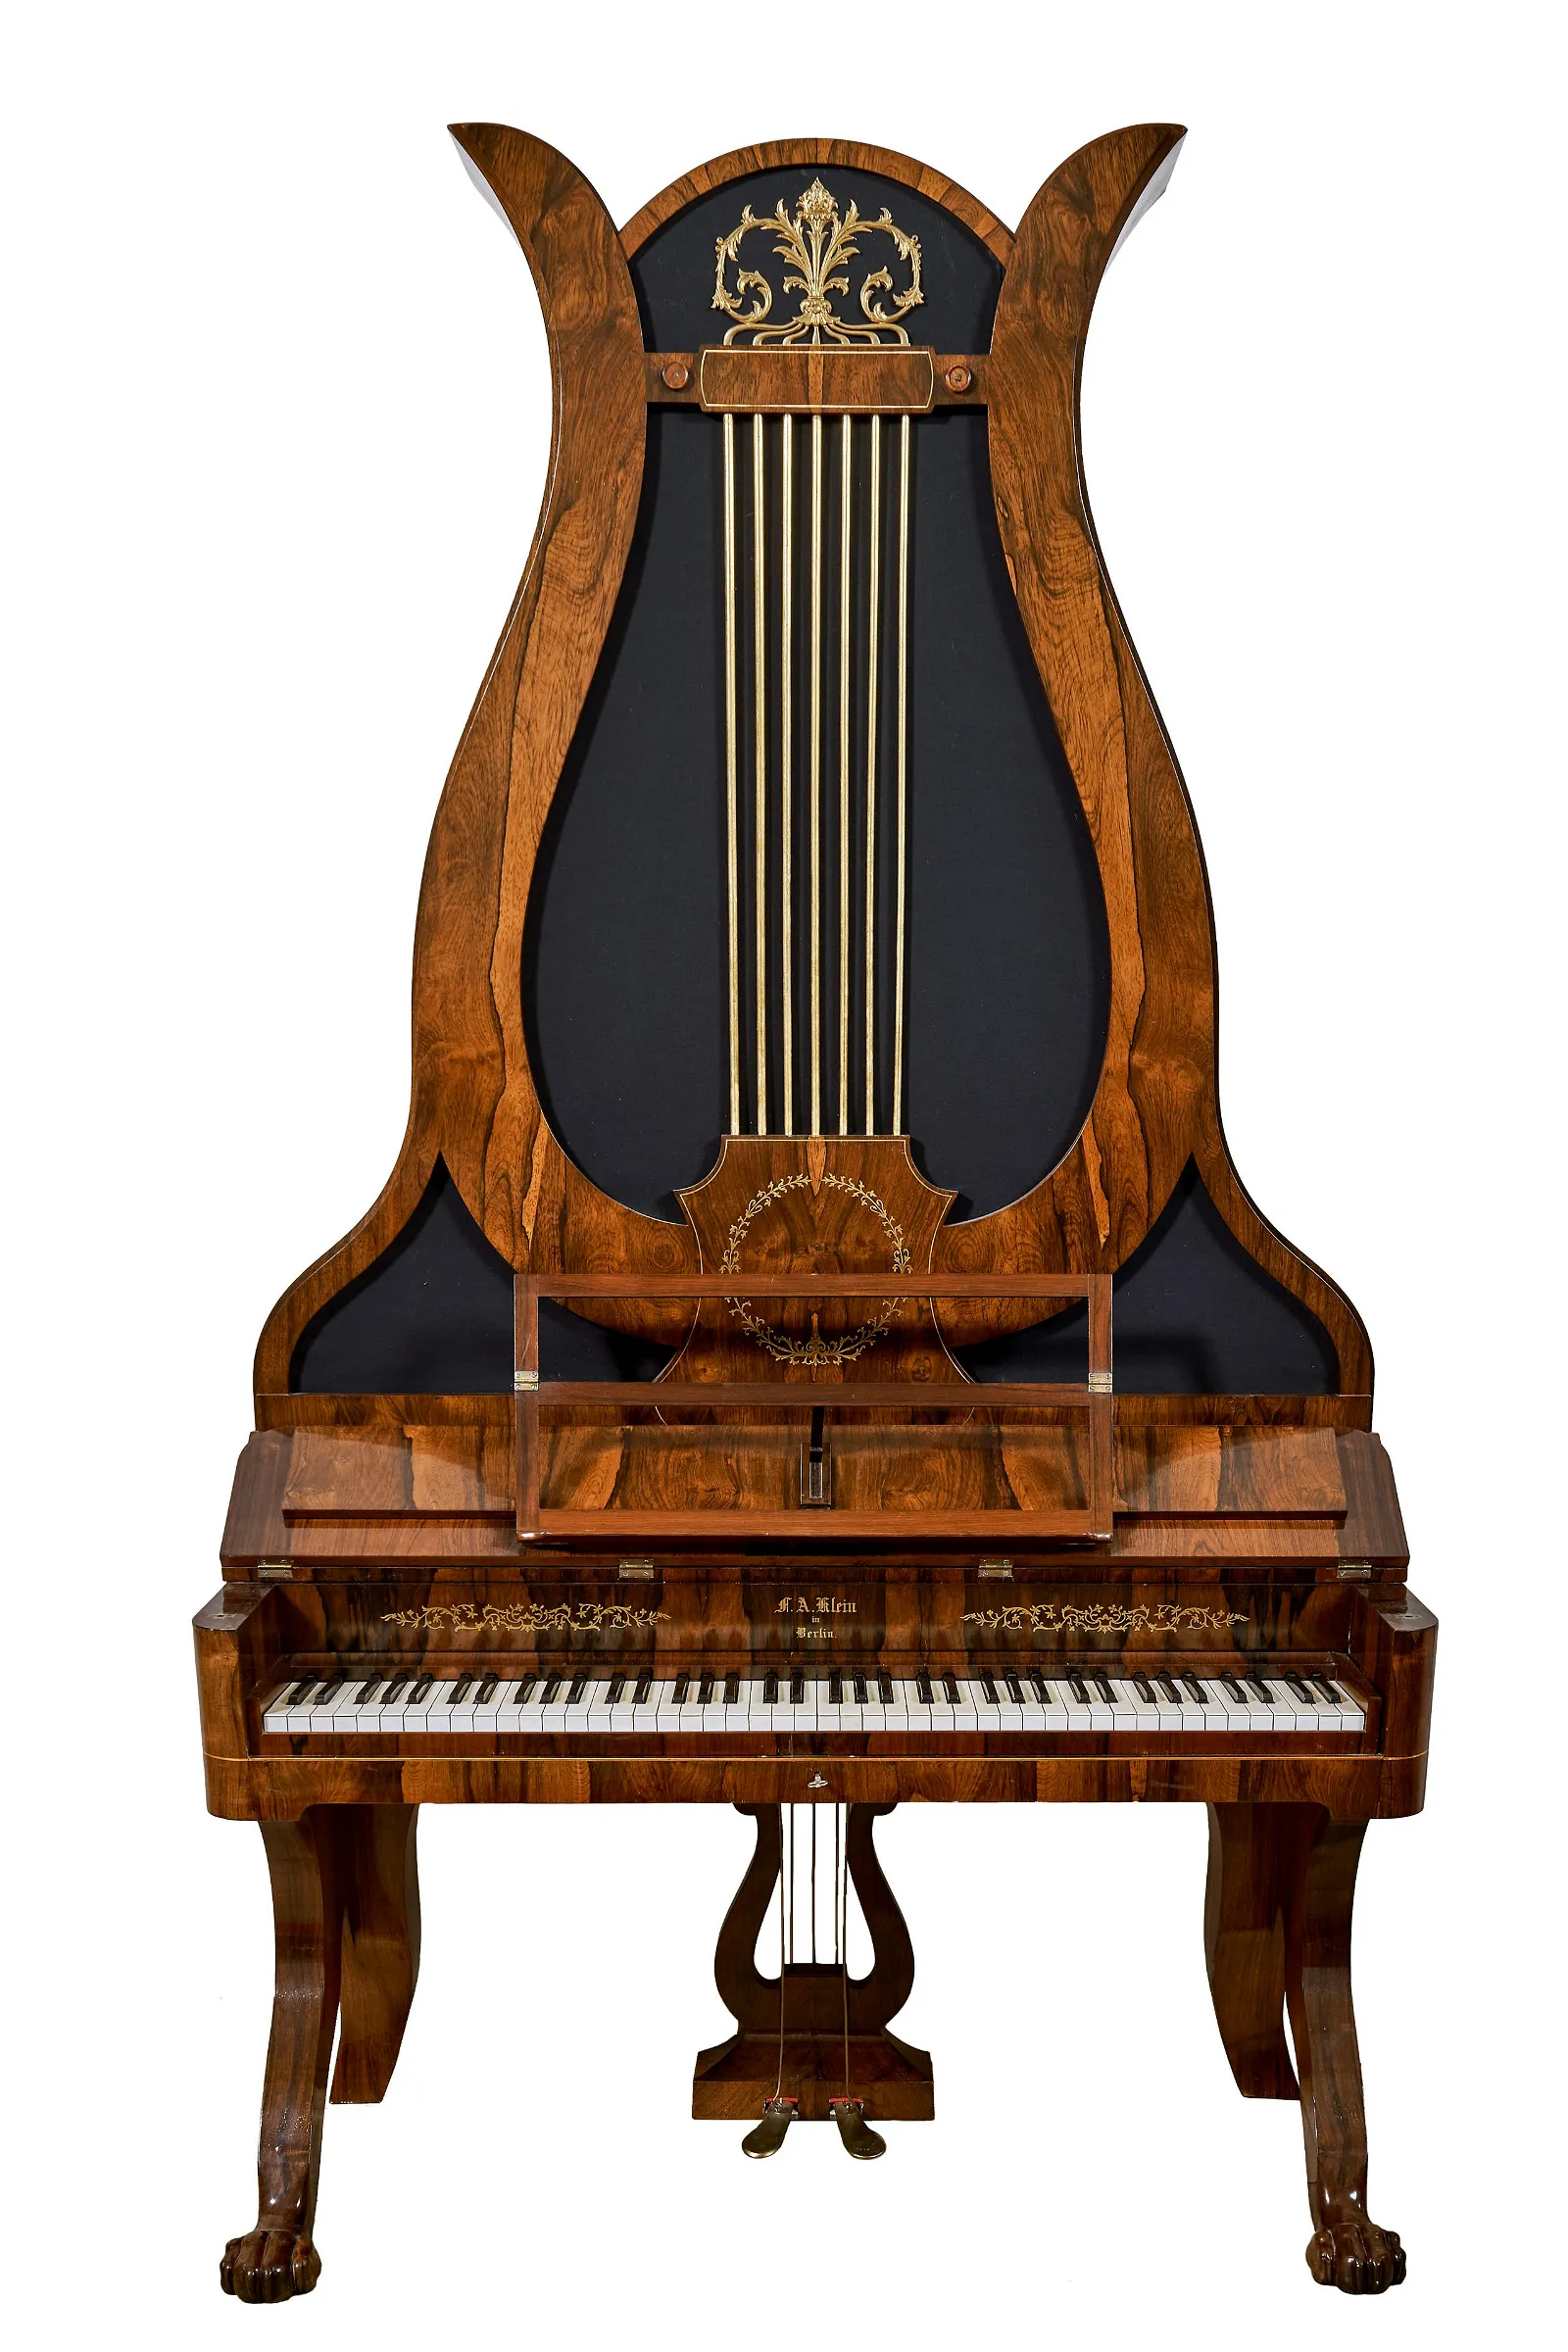 An 1853 German upright piano with a design that hides the piano harp in a lyre-form case earned €9,500 (about $9,500) plus the buyer’s premium in July 2021. Image courtesy of Kunstauktionhaus Schlosser and LiveAuctioneers